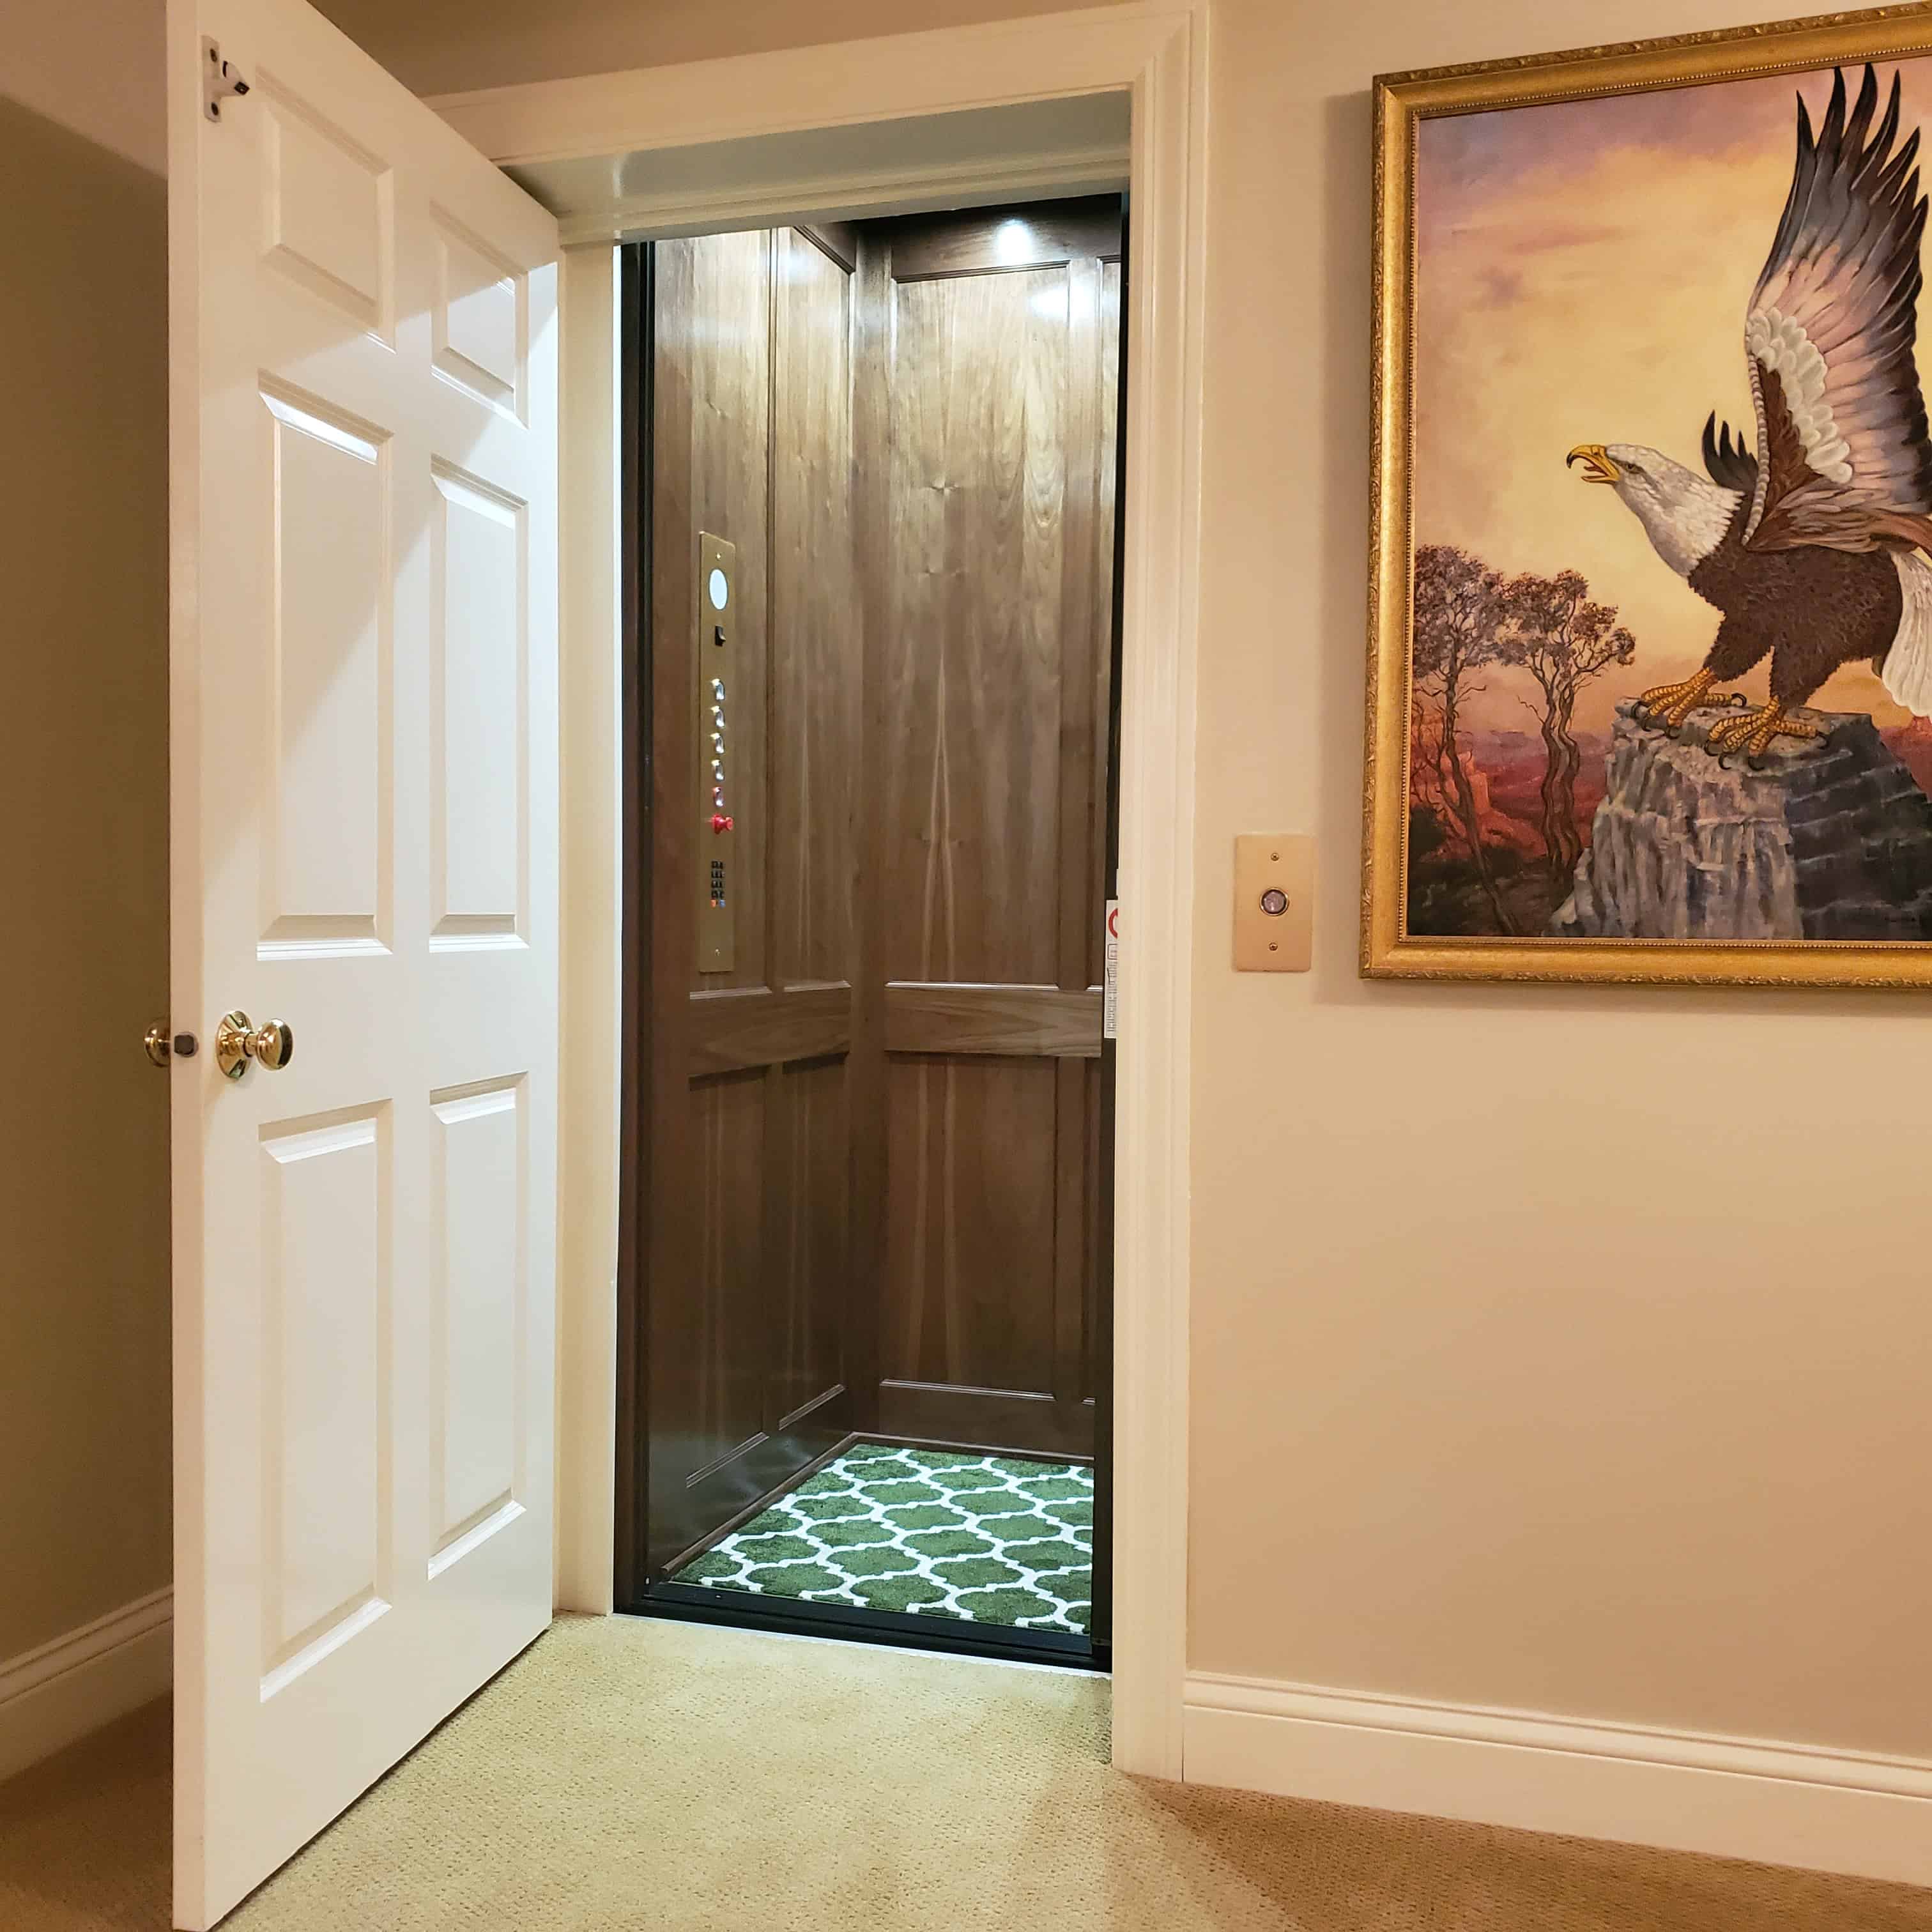 Home Elevator in hoistway installed by Lifeway Mobility